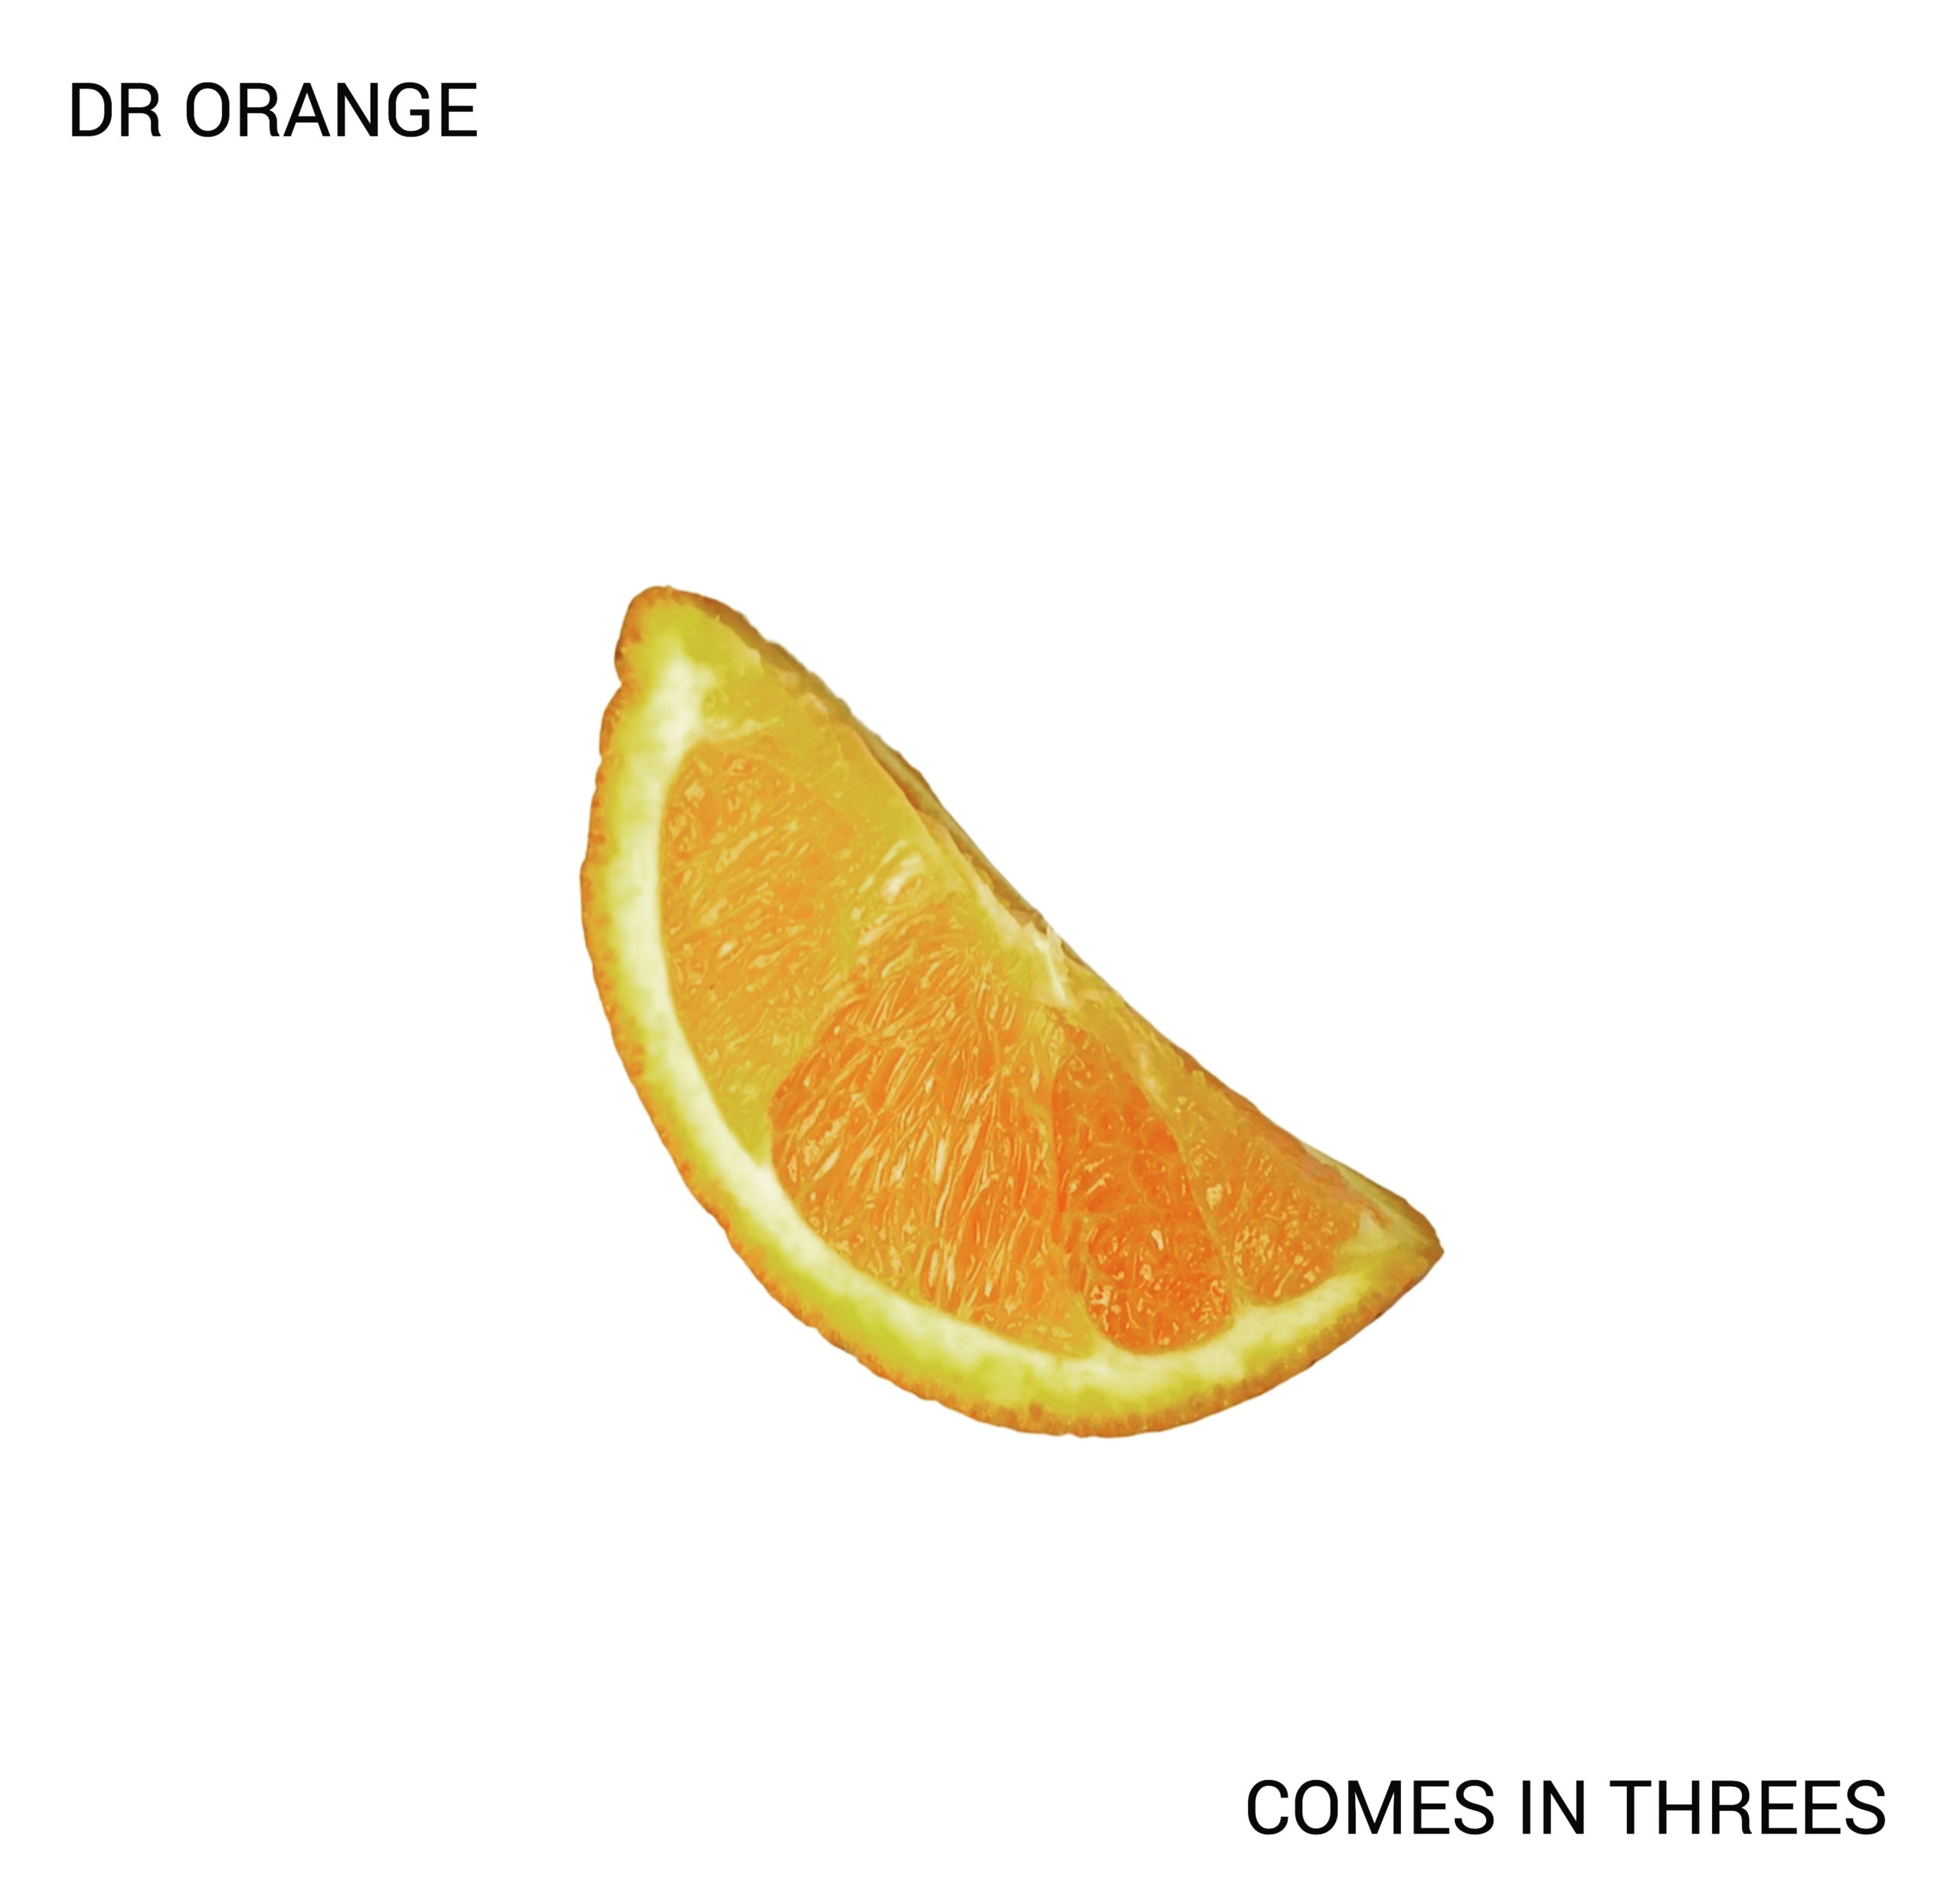 **PREMIERE** Watch The Video for Dr Orange’s Debut Single – Comes in Threes**HERE**